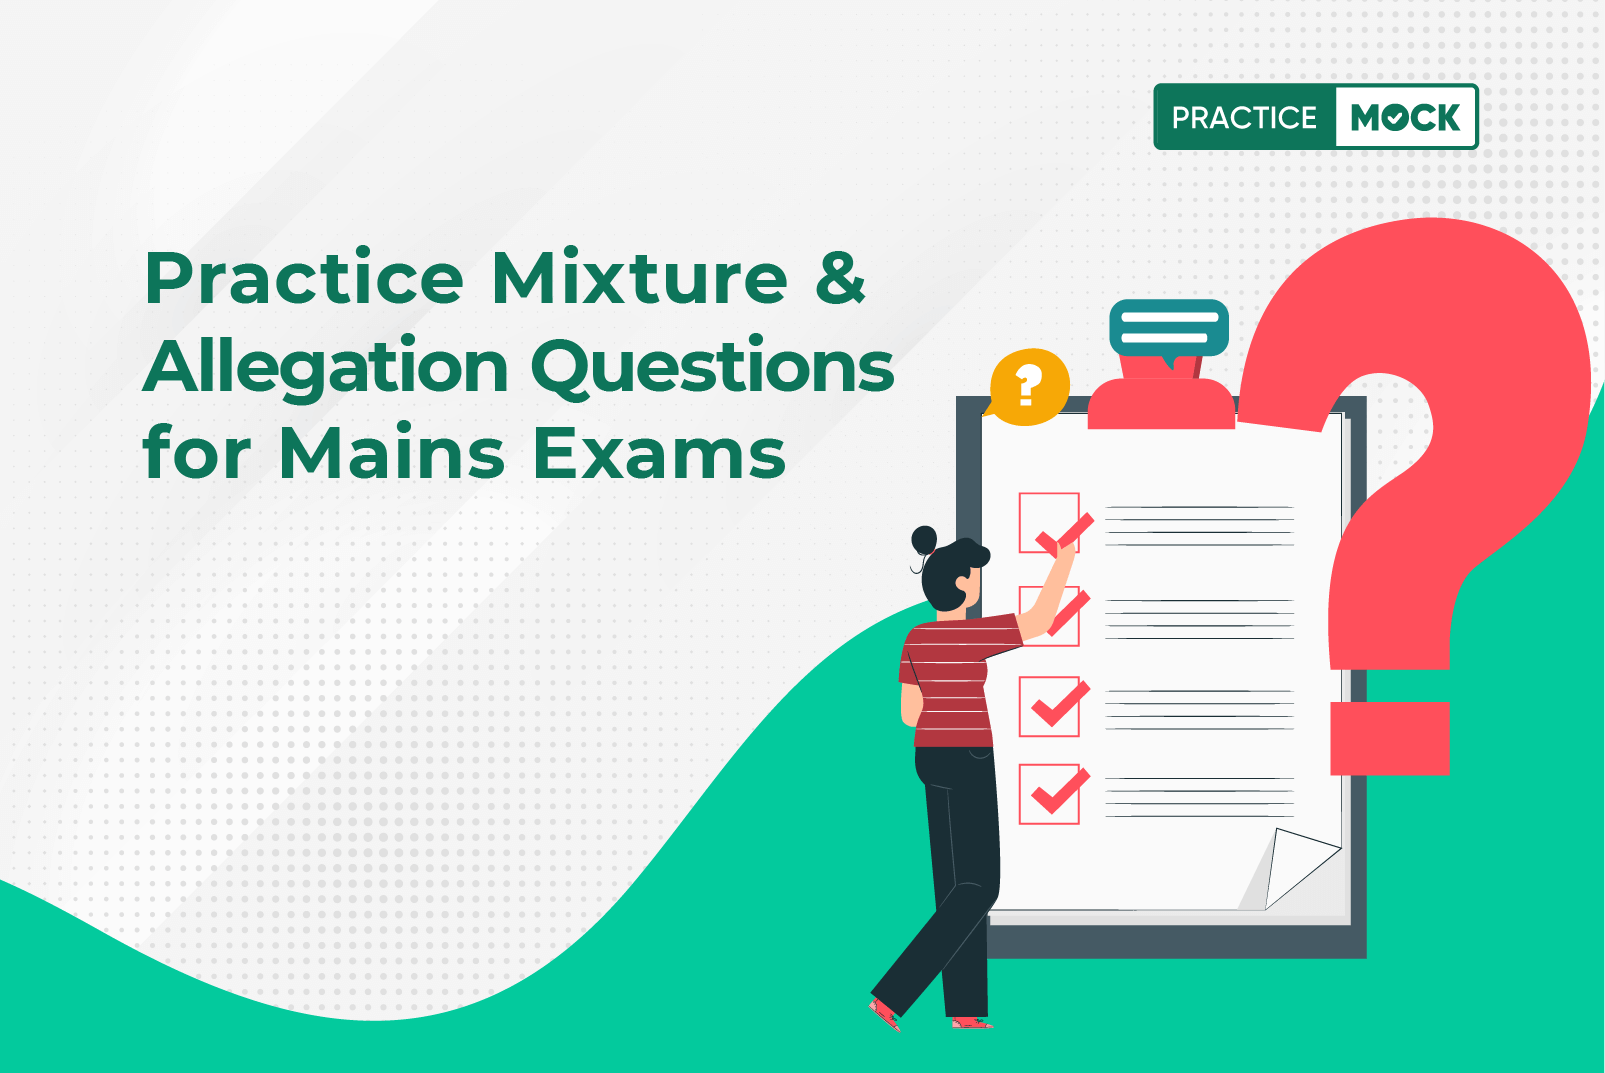 Practice Mixture & Allegation Questions for Mains Exams